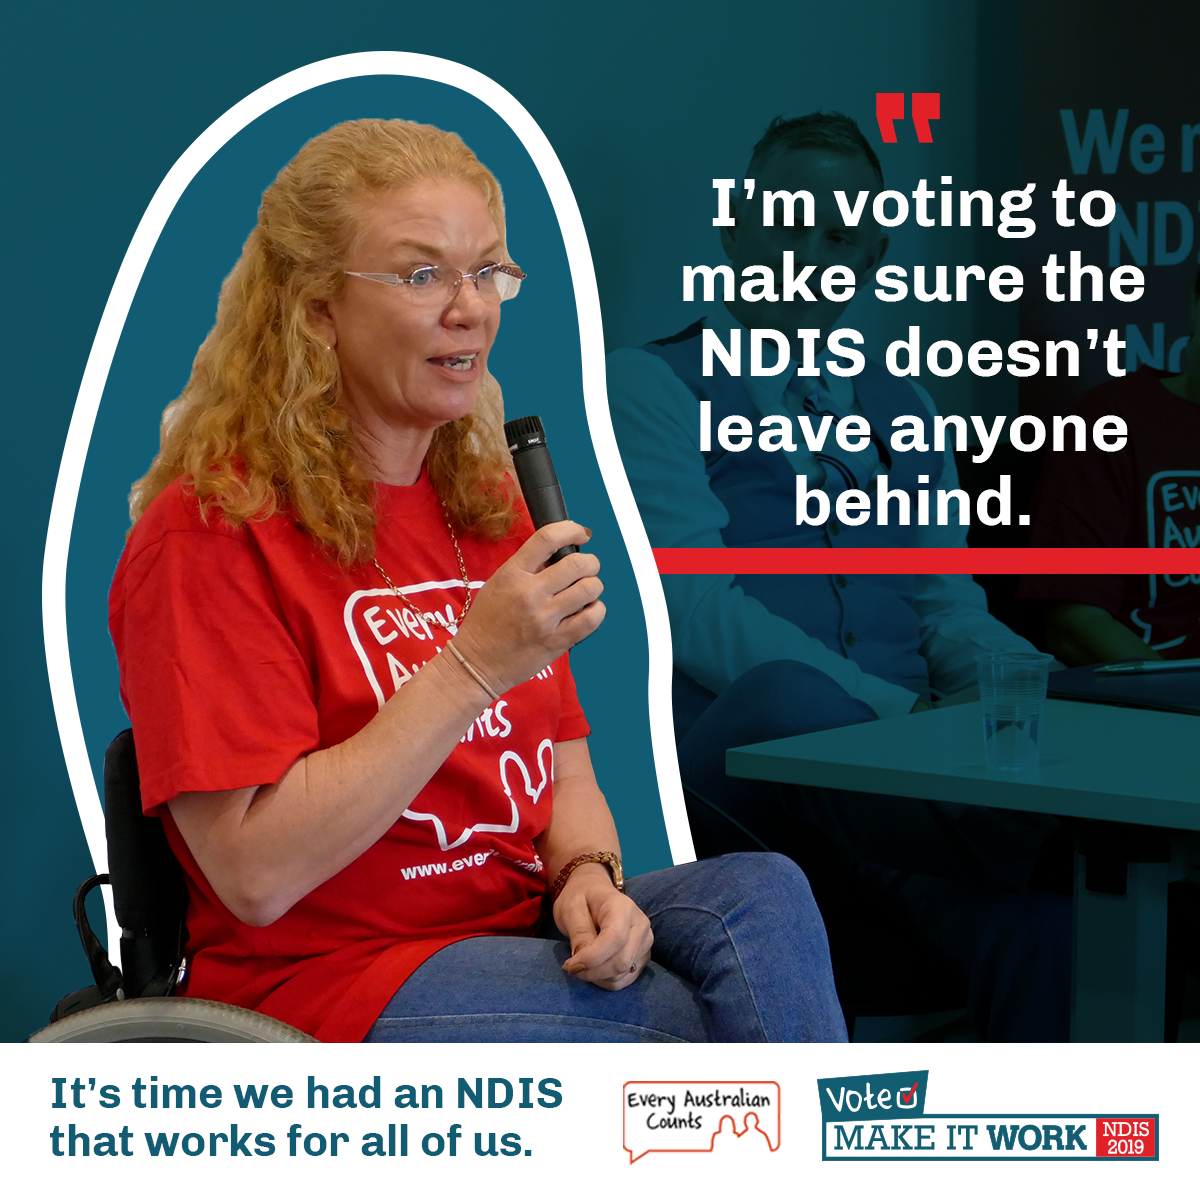 Sharegraphic - I'm voting to make sure the NDIS doesn't leave anyone behind